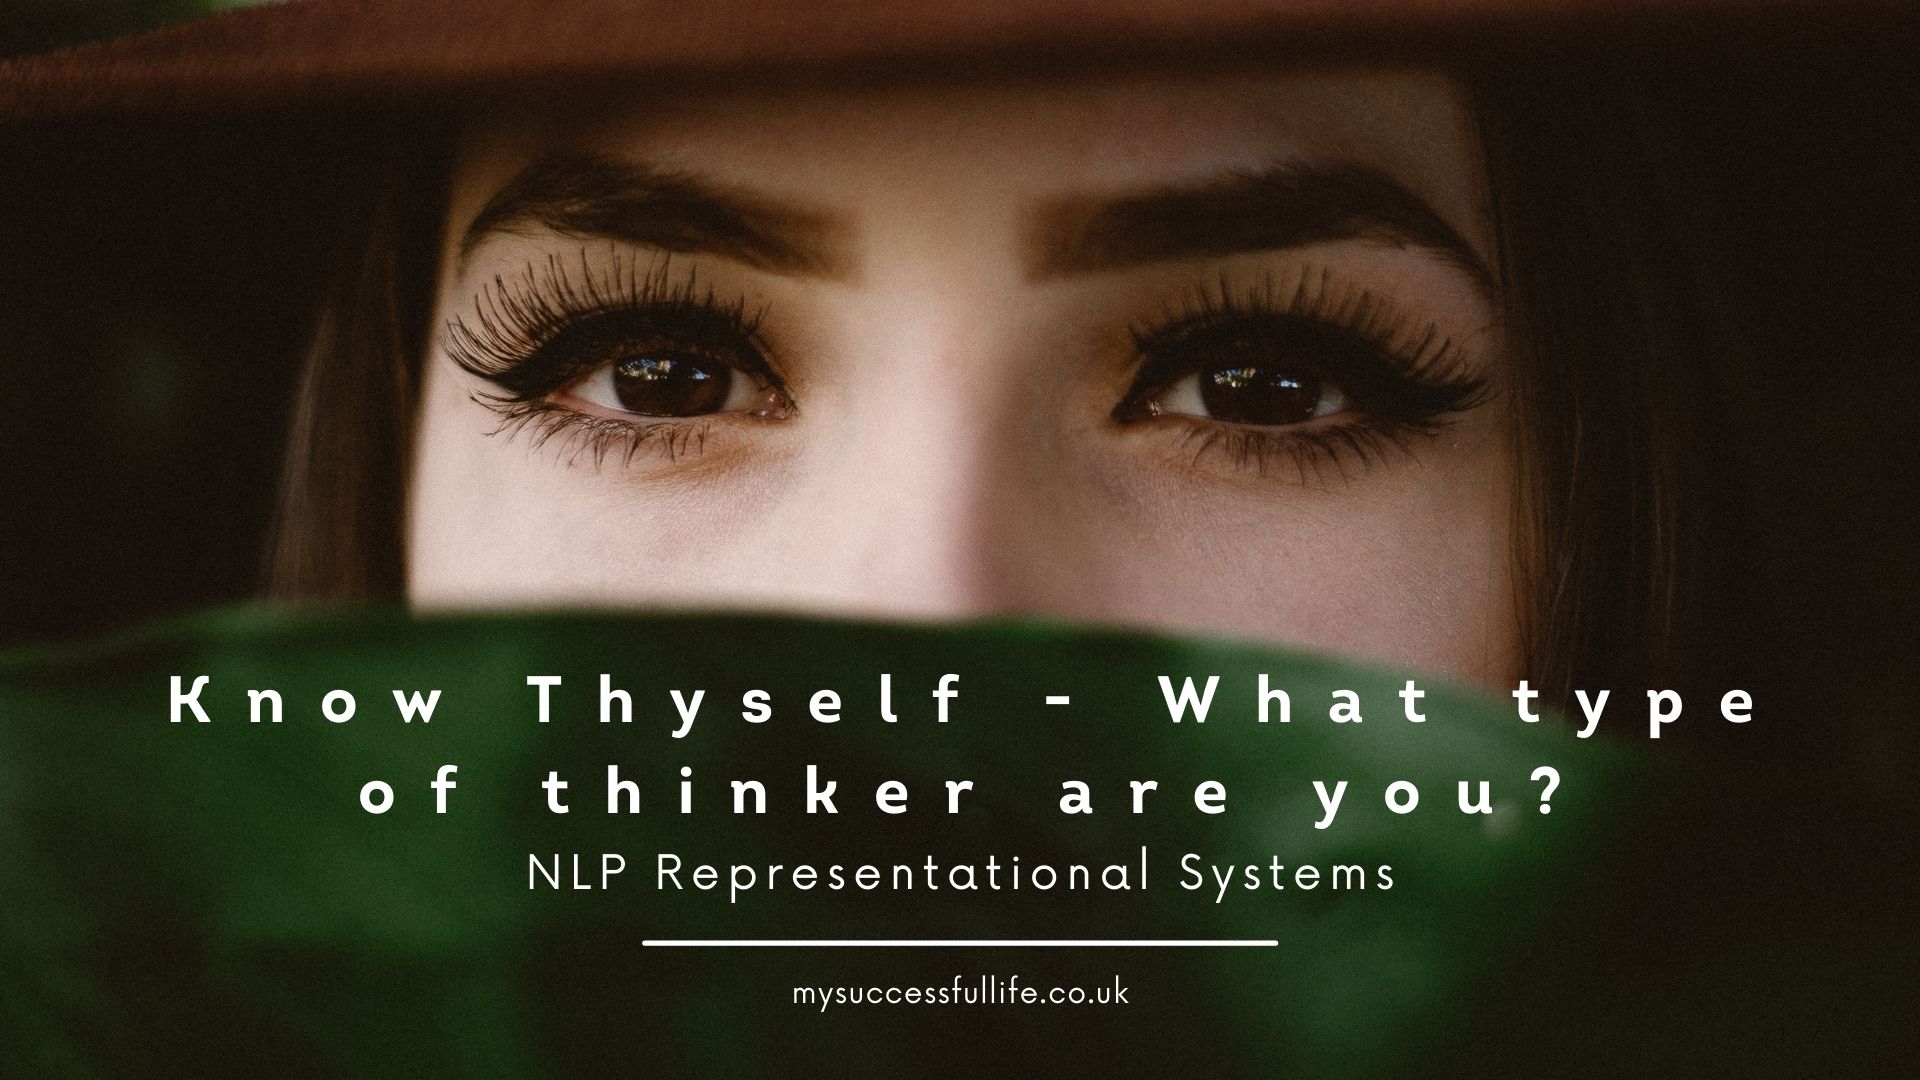 Know Thyself - What type of thinker are you? NLP Representational Systems